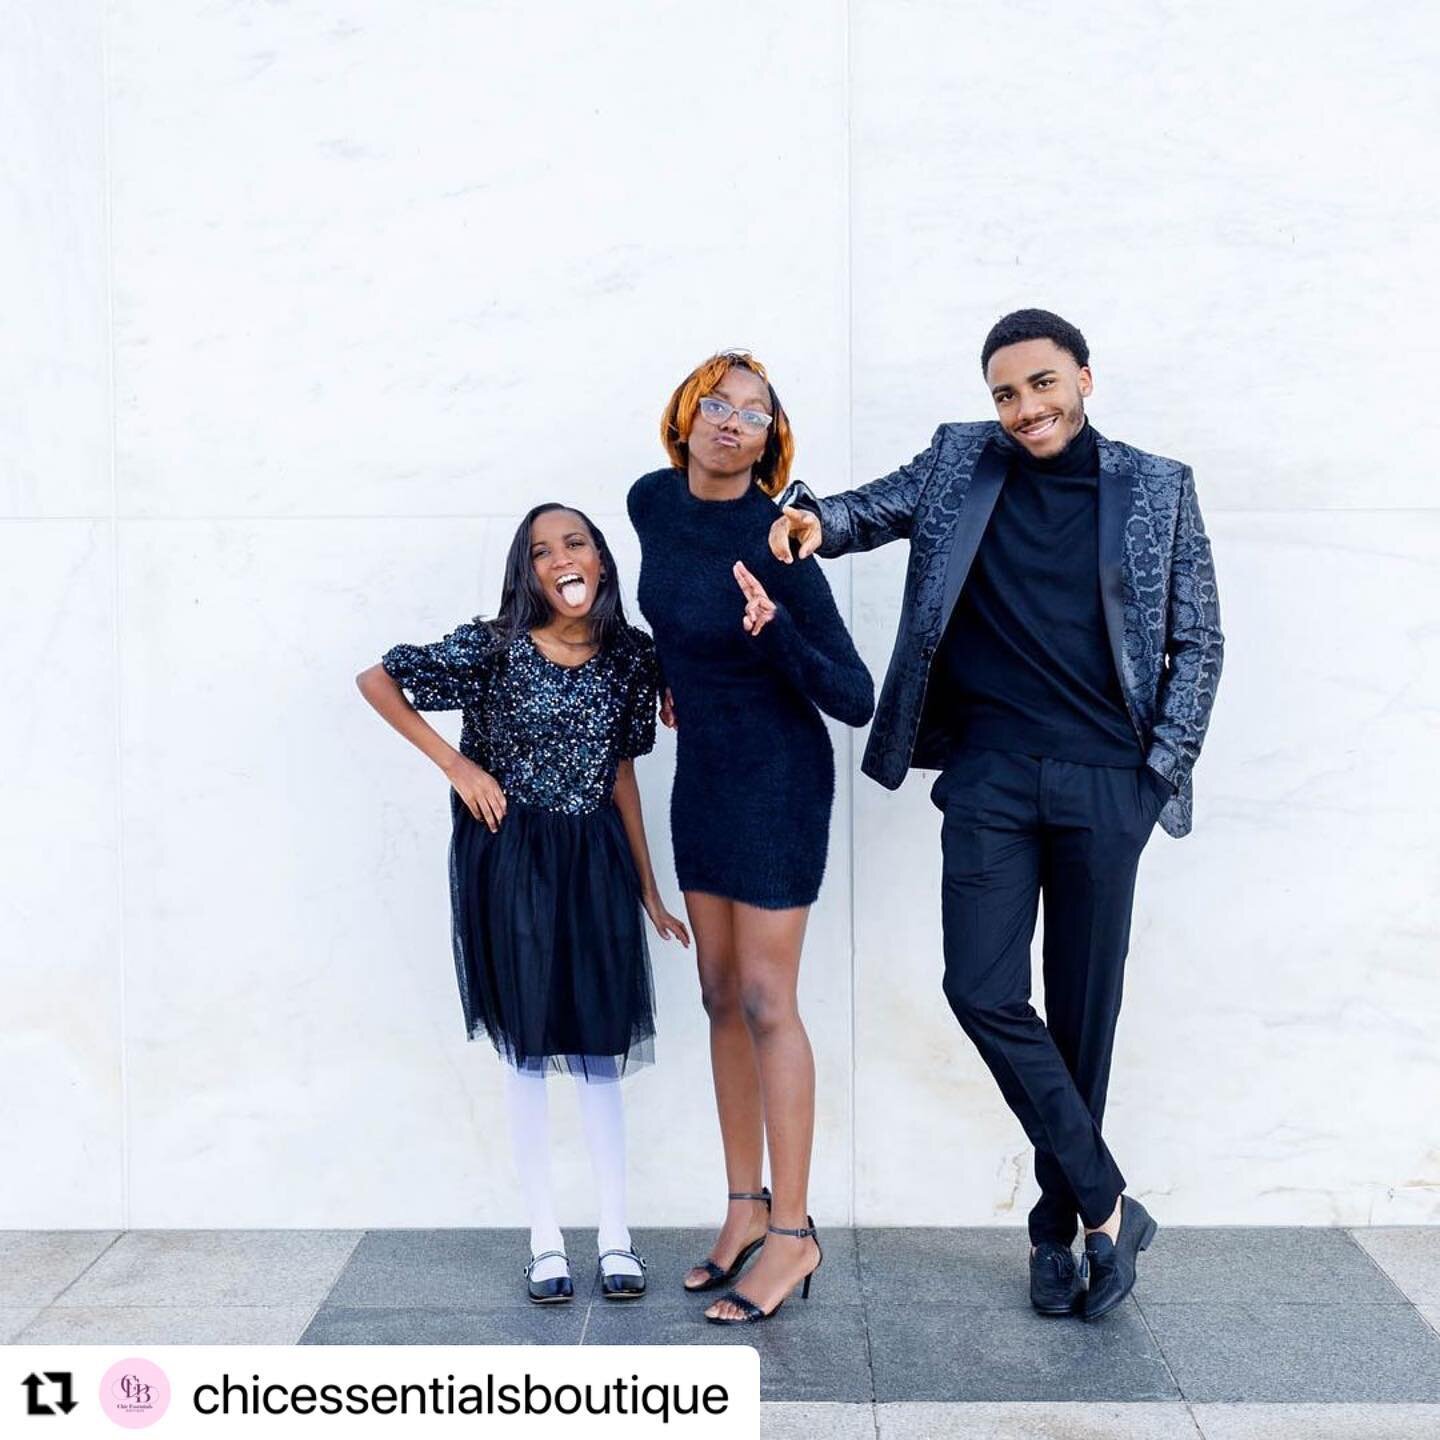 #Repost @chicessentialsboutique with @make_repost
・・・
𝐌𝐲 𝐁𝐈𝐆𝐆𝐄𝐒𝐓 𝟐𝟎𝟐𝟎 𝐅𝐋𝐄𝐗 𝐫𝐞𝐦𝐚𝐢𝐧𝐬 𝐔𝐍𝐃𝐄𝐅𝐄𝐀𝐓𝐄𝐃 👦🏾👧🏾👧🏾 👆🏾⁣
.⁣
.⁣
They drive me crazy but I look forward to them &ldquo;tasting&rdquo; the cookie dough and chasing